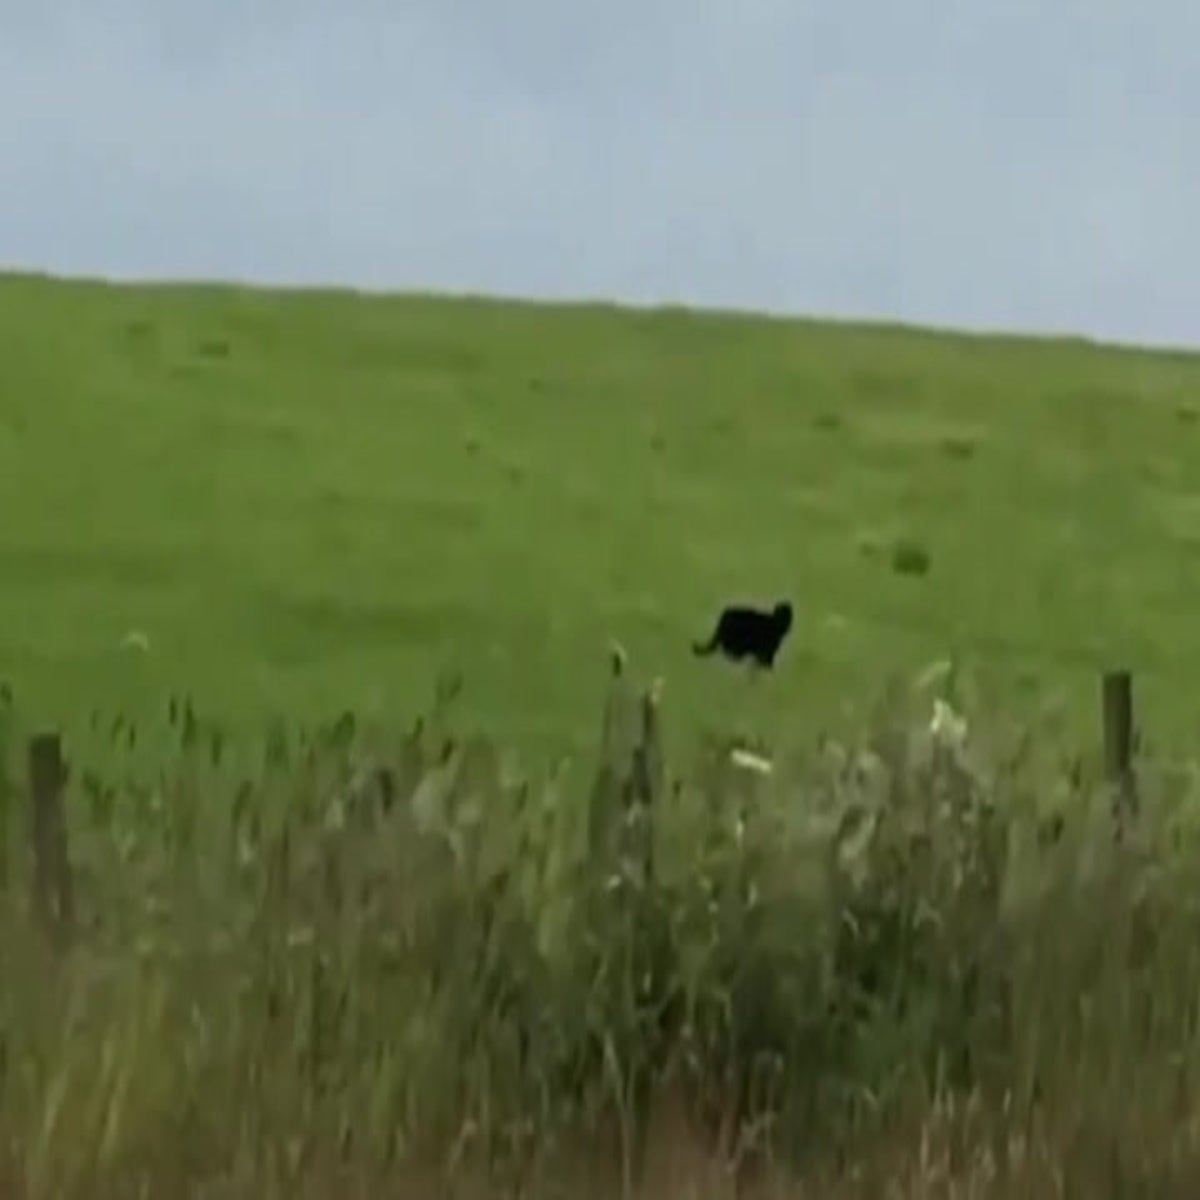 Black panther' spotted in Scotland just a 'large domestic cat